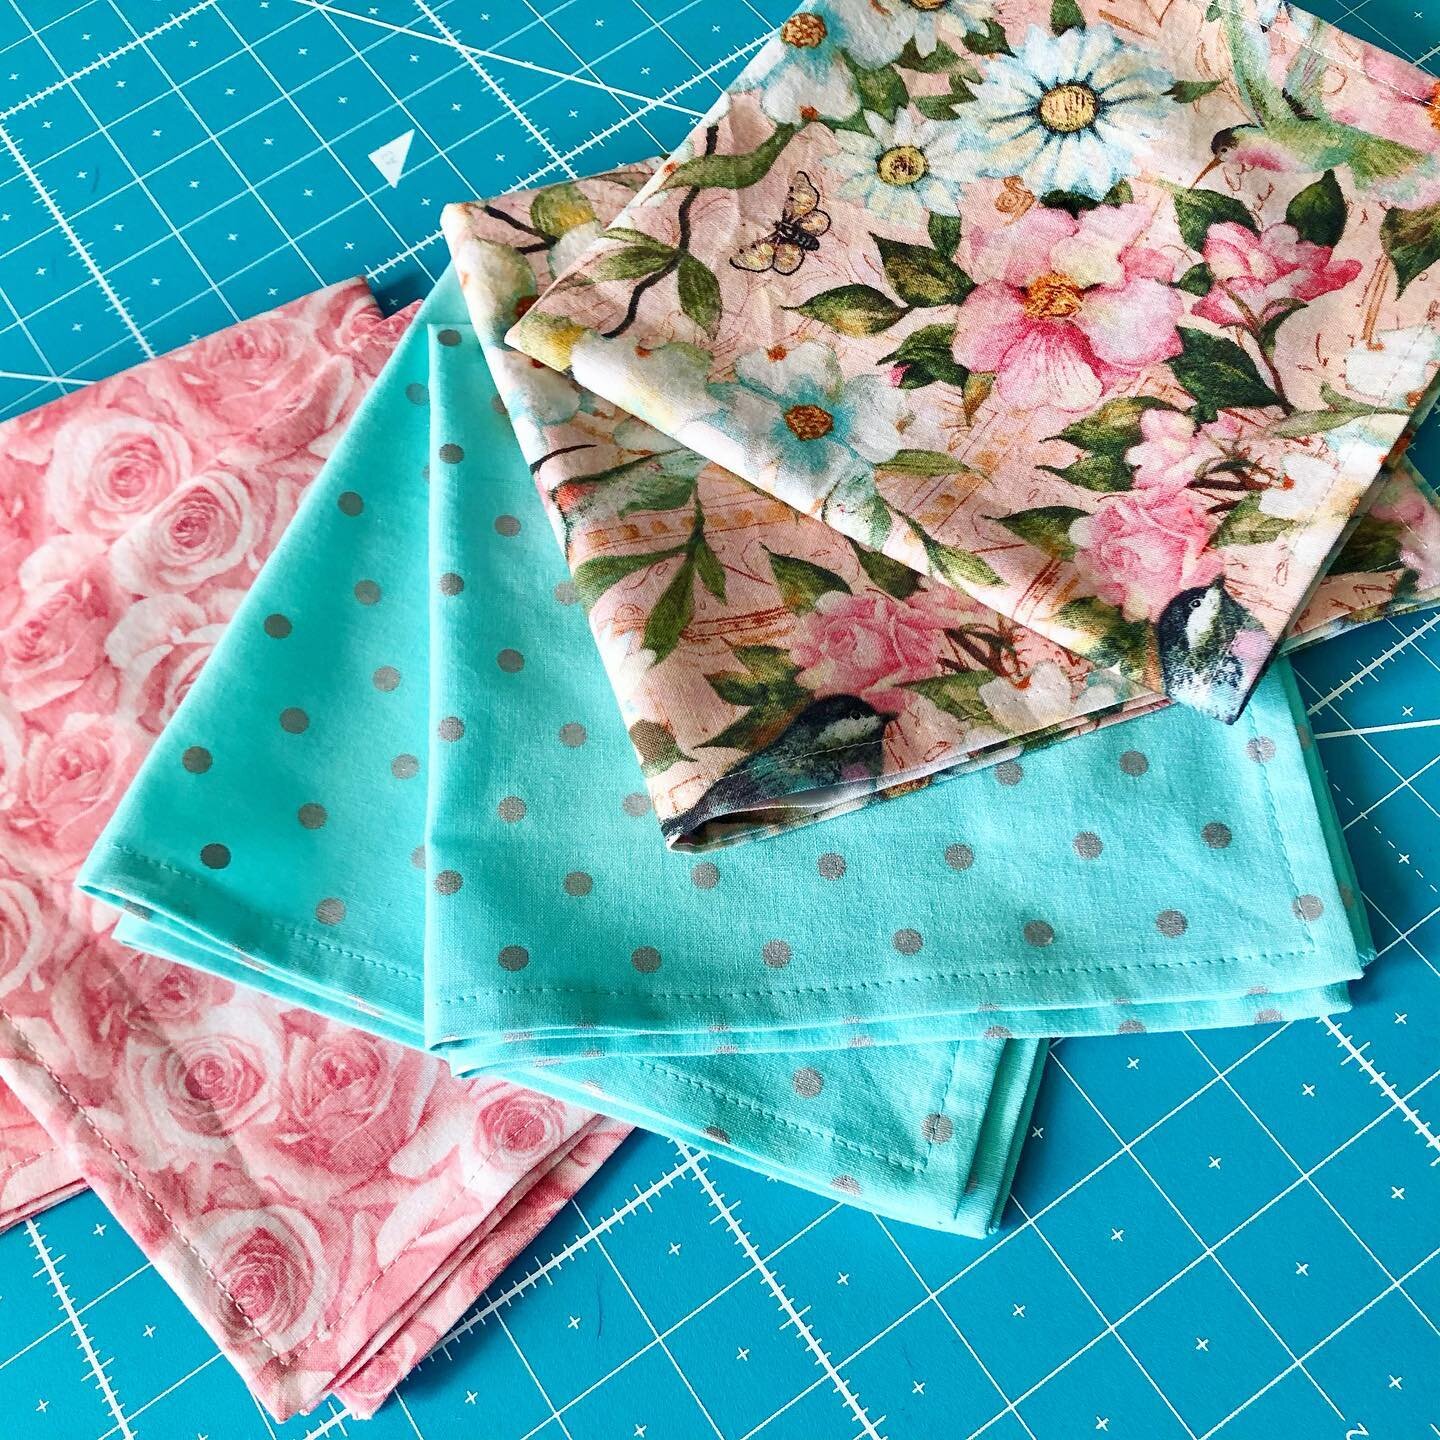 Spring napkins for tomorrow&rsquo;s Easter brunch feast! Want to make your own? Ask me about sewing classes coming soon. #sewinglove #sewingclasses #sewinglessons #learntosew #instasewing #isew #easterdecor #springsewing #sewfun